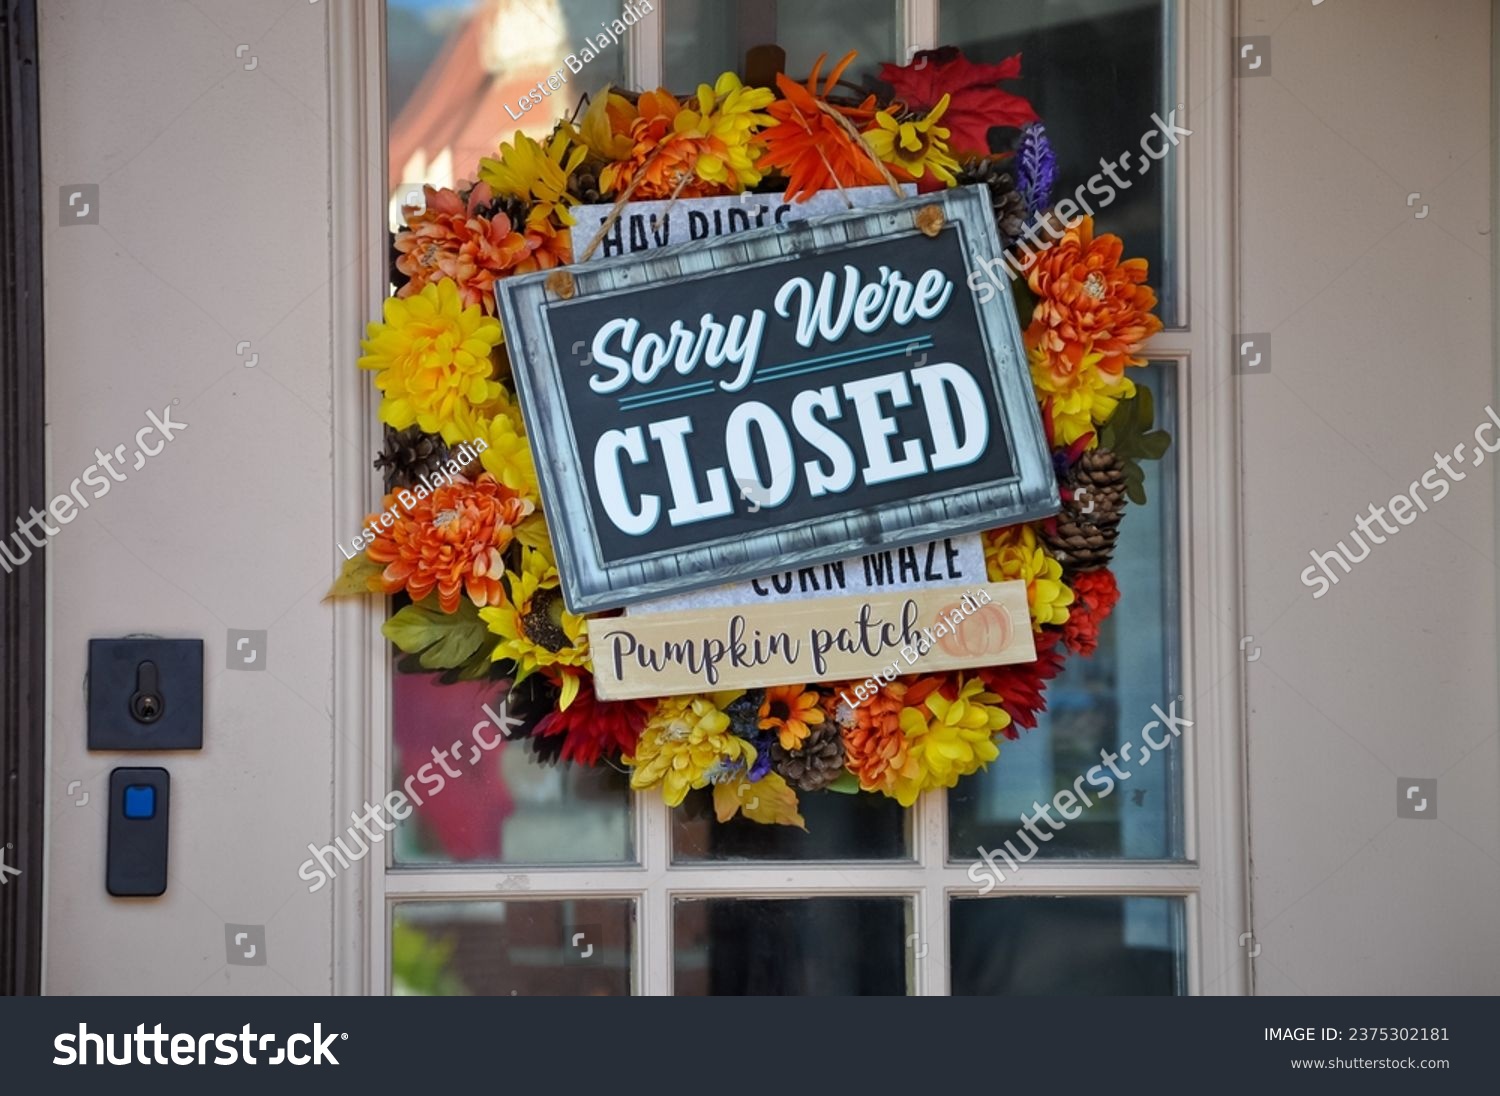 Sorry we're closed sign hanging in a door #2375302181